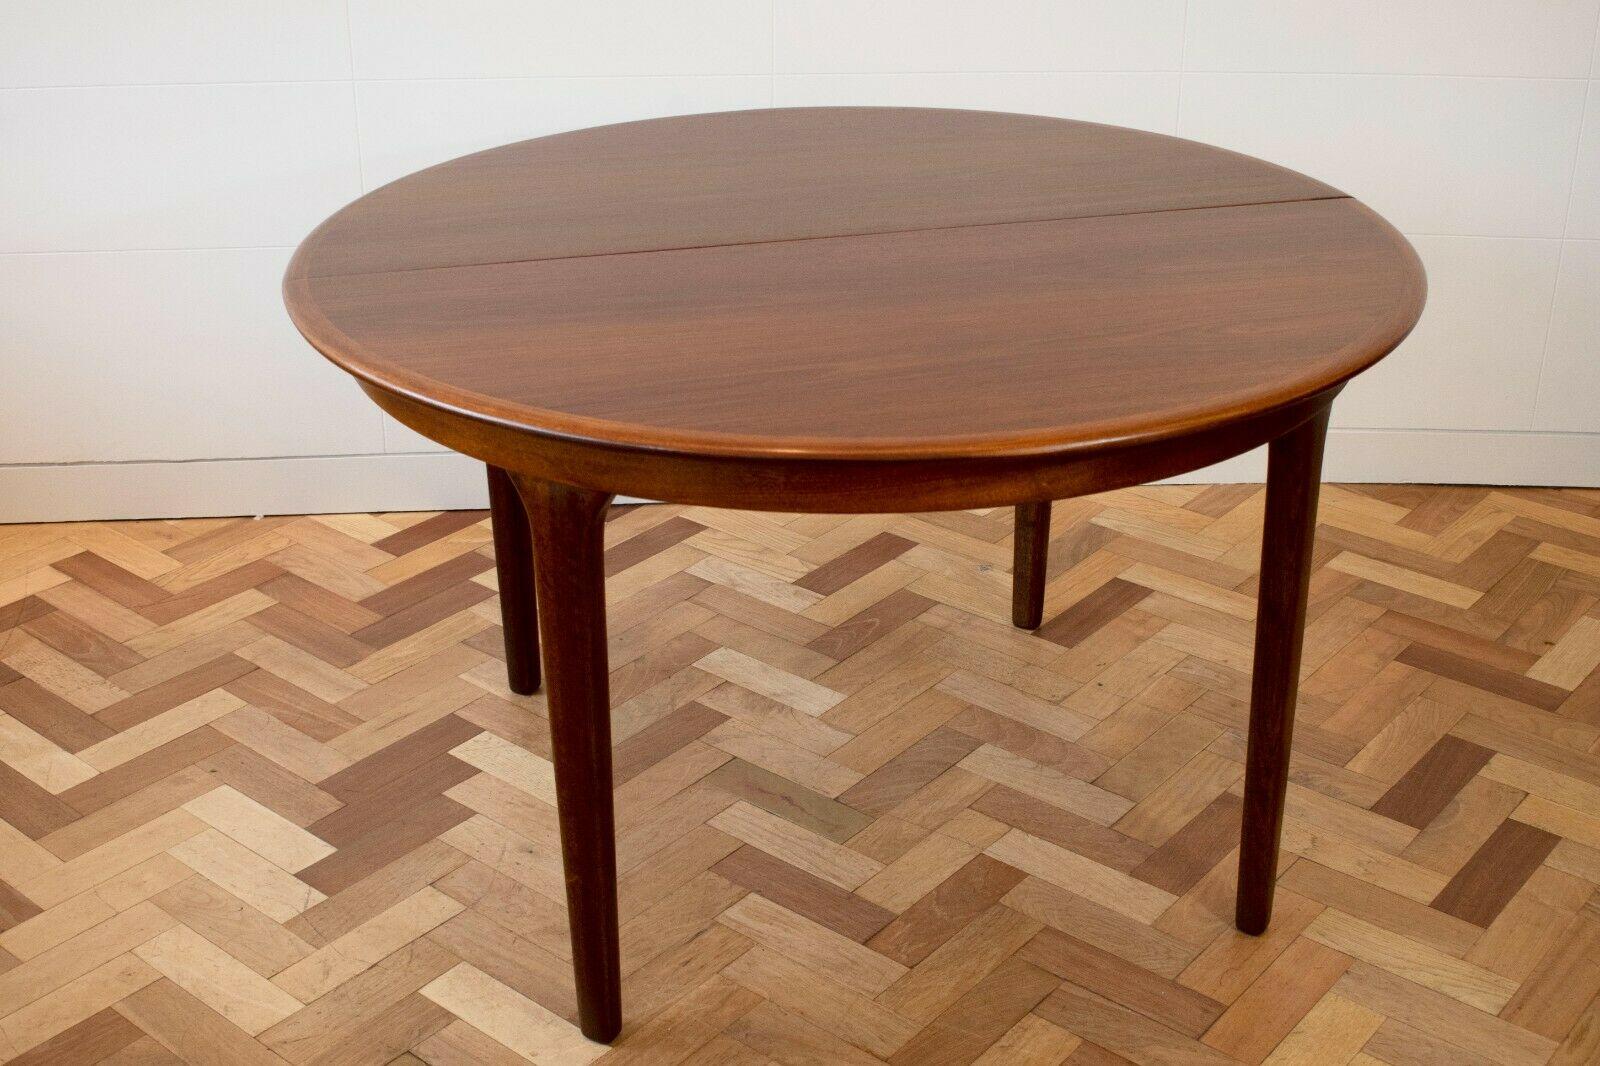 A beautiful 1960's Danish rosewood dining table, that comes with two leaves for the option to extend it to two different lengths. 

This elegant piece is of great quality craftsmanship and brilliant design, allowing for up to eight to sit around